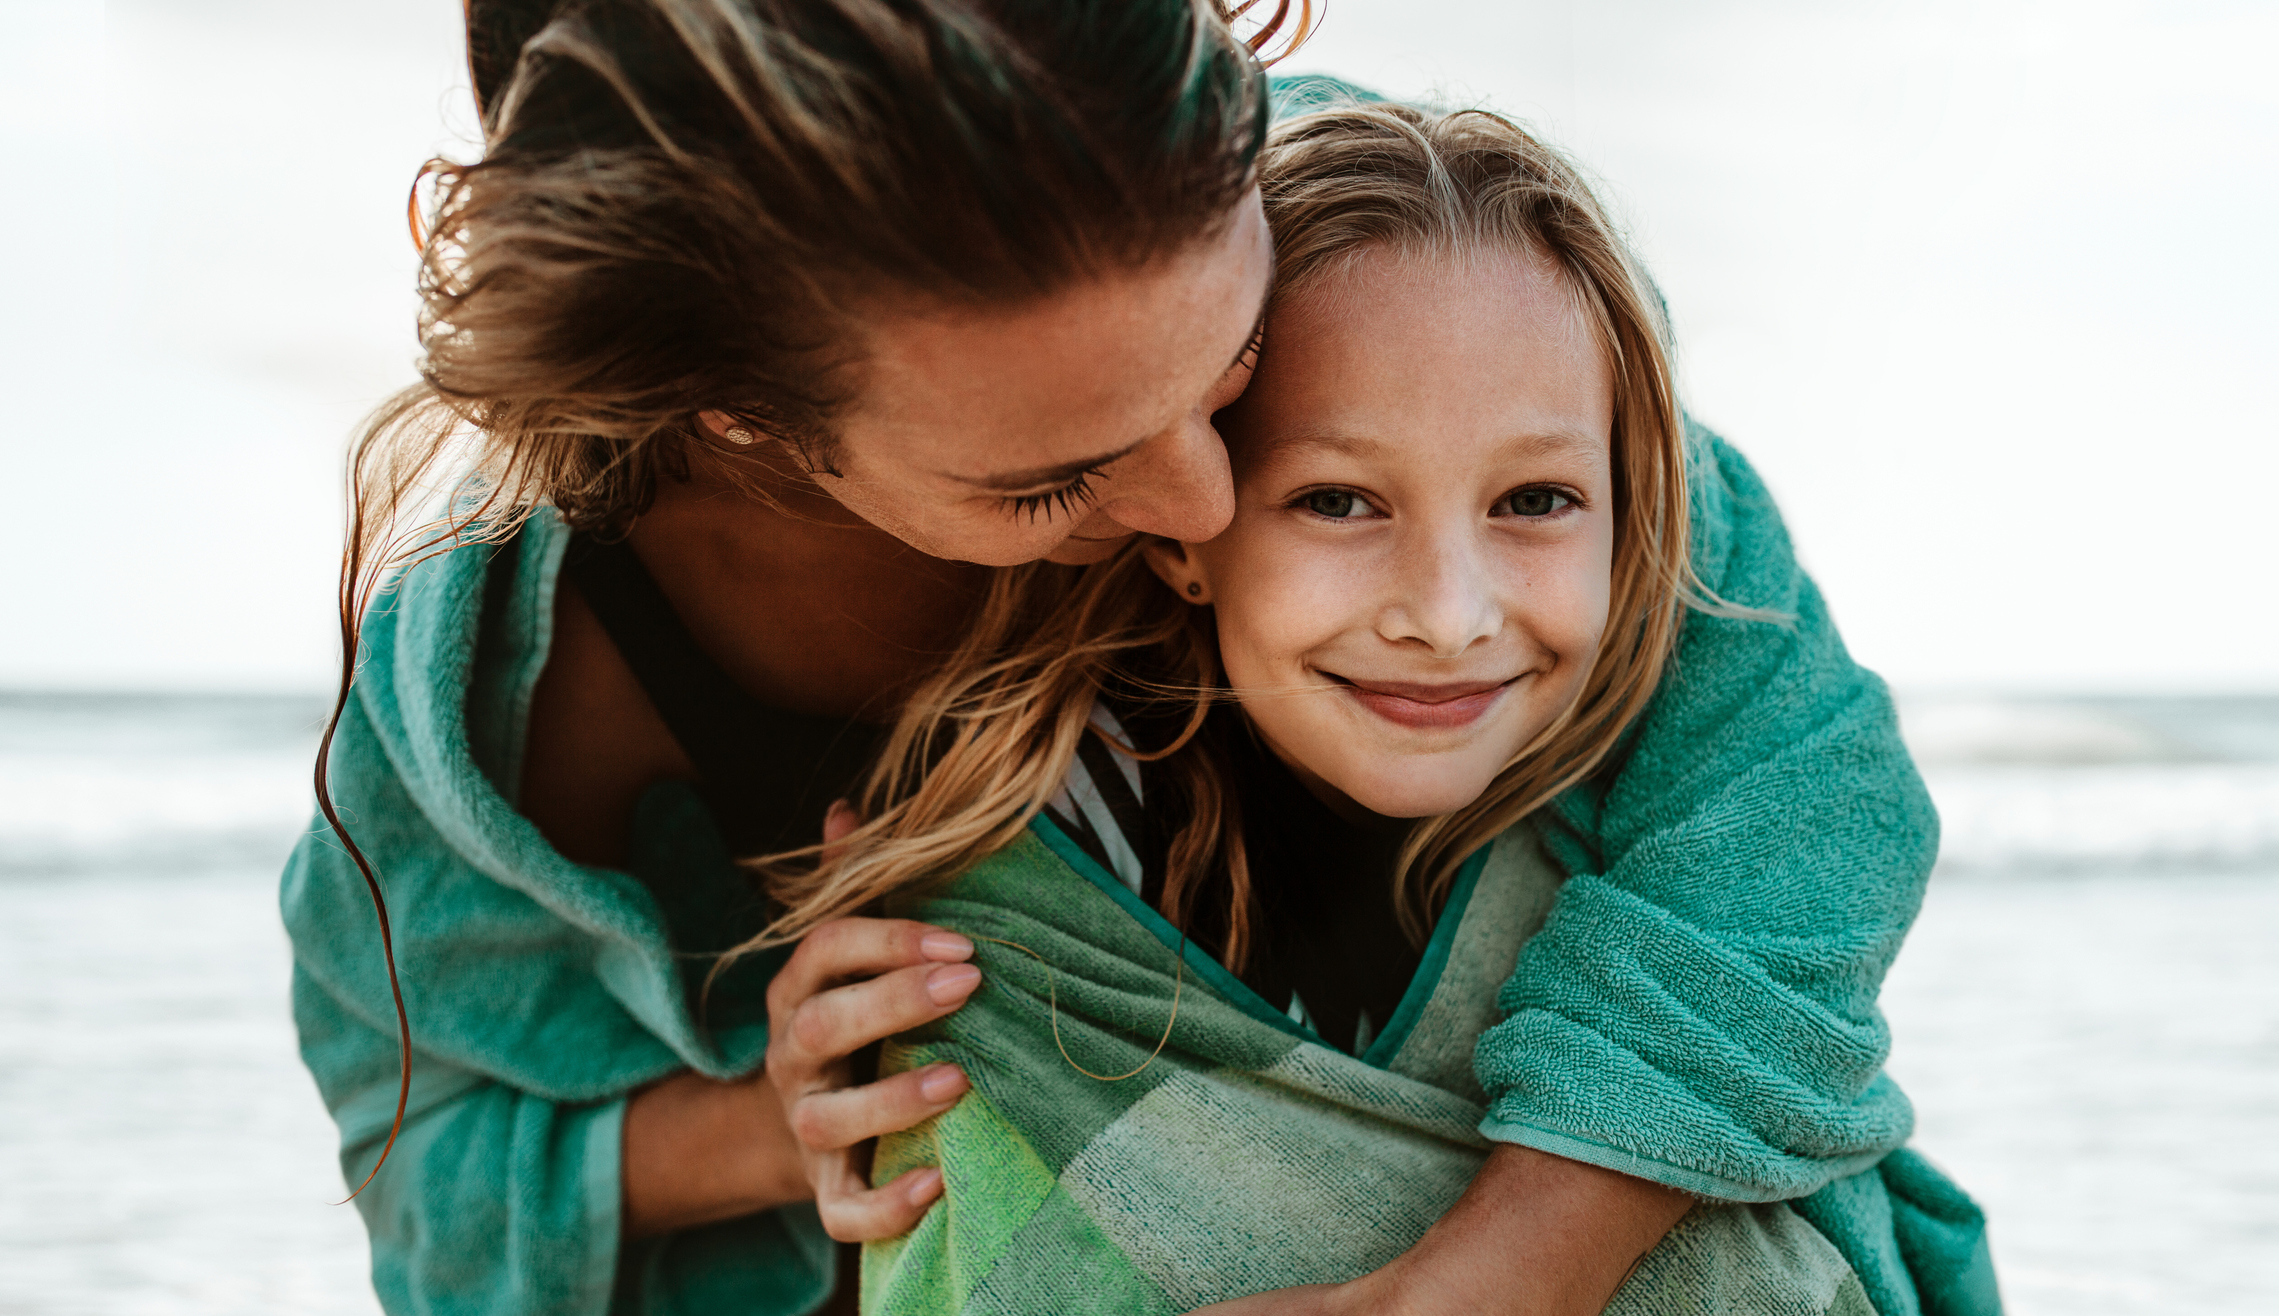 The Simplest Way to Connect With Your Kid | Parent Cue Blog